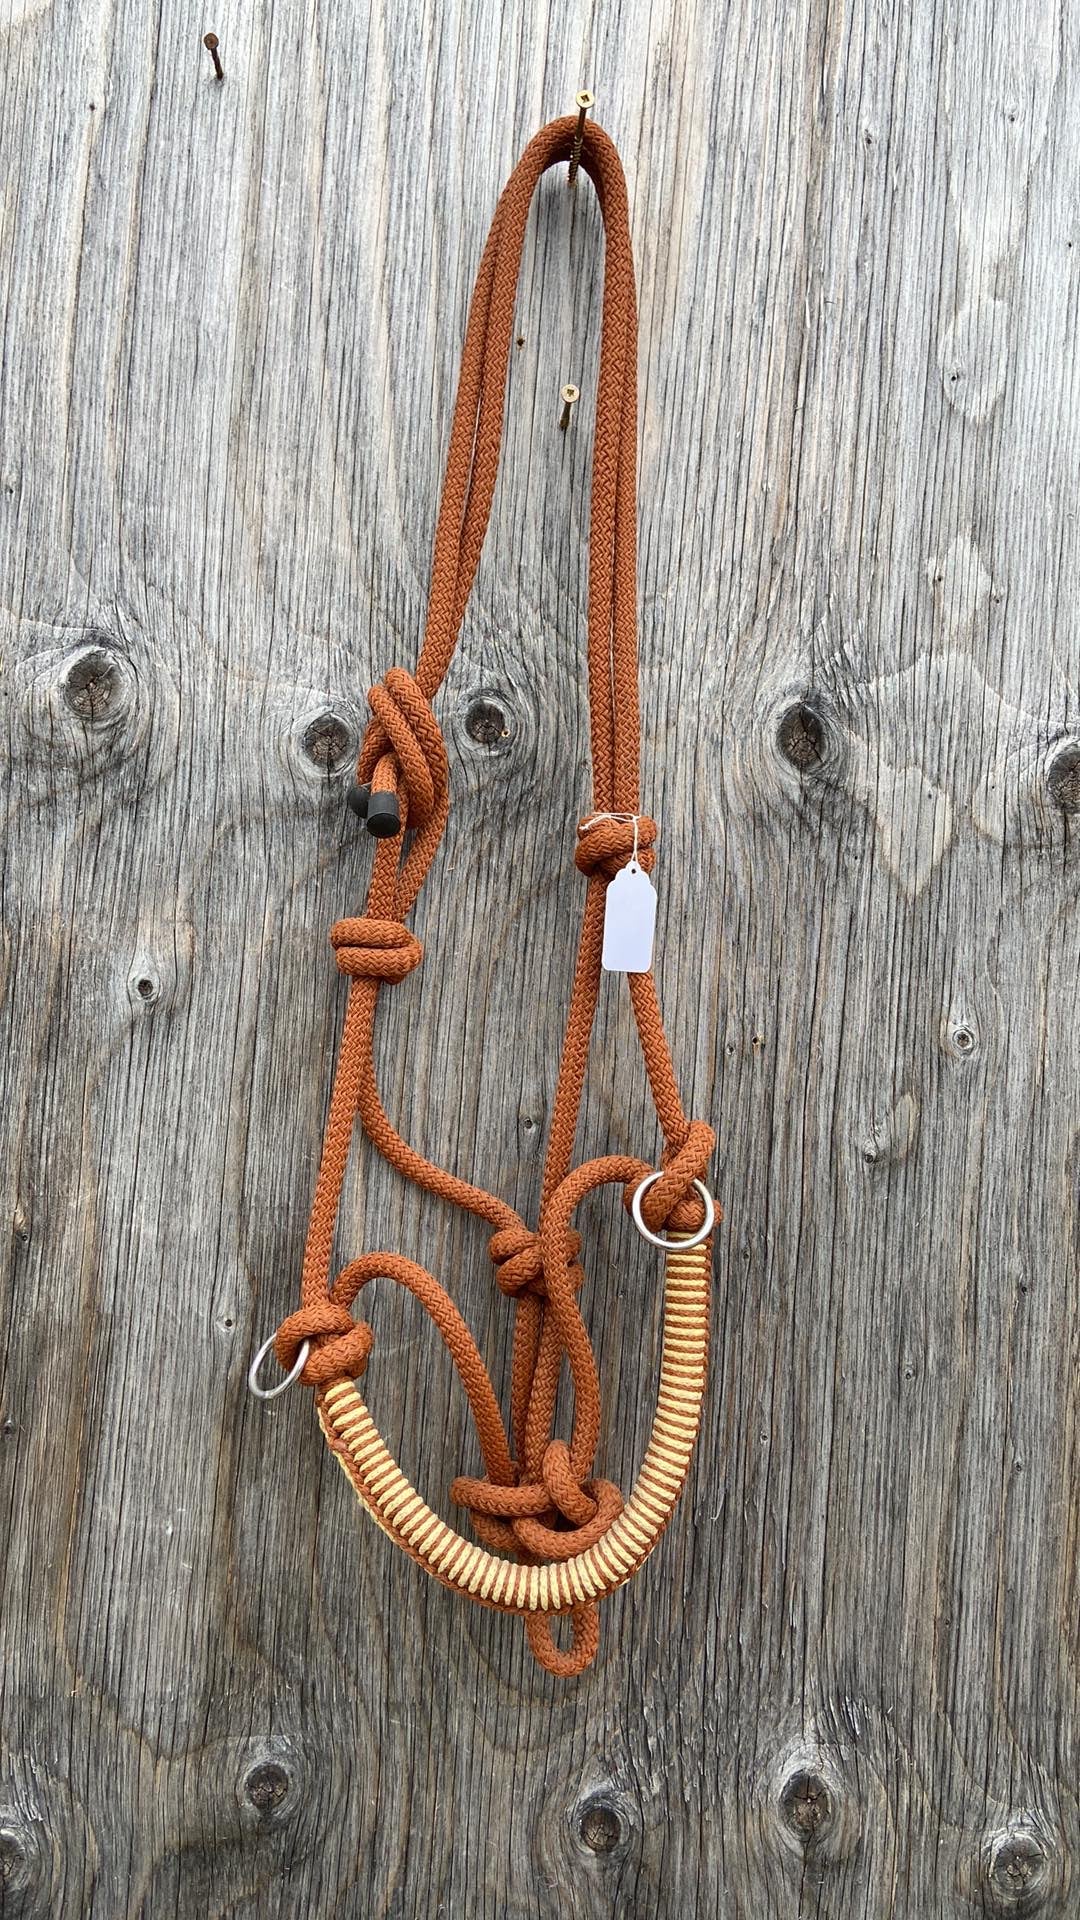 New braided nose rope halter